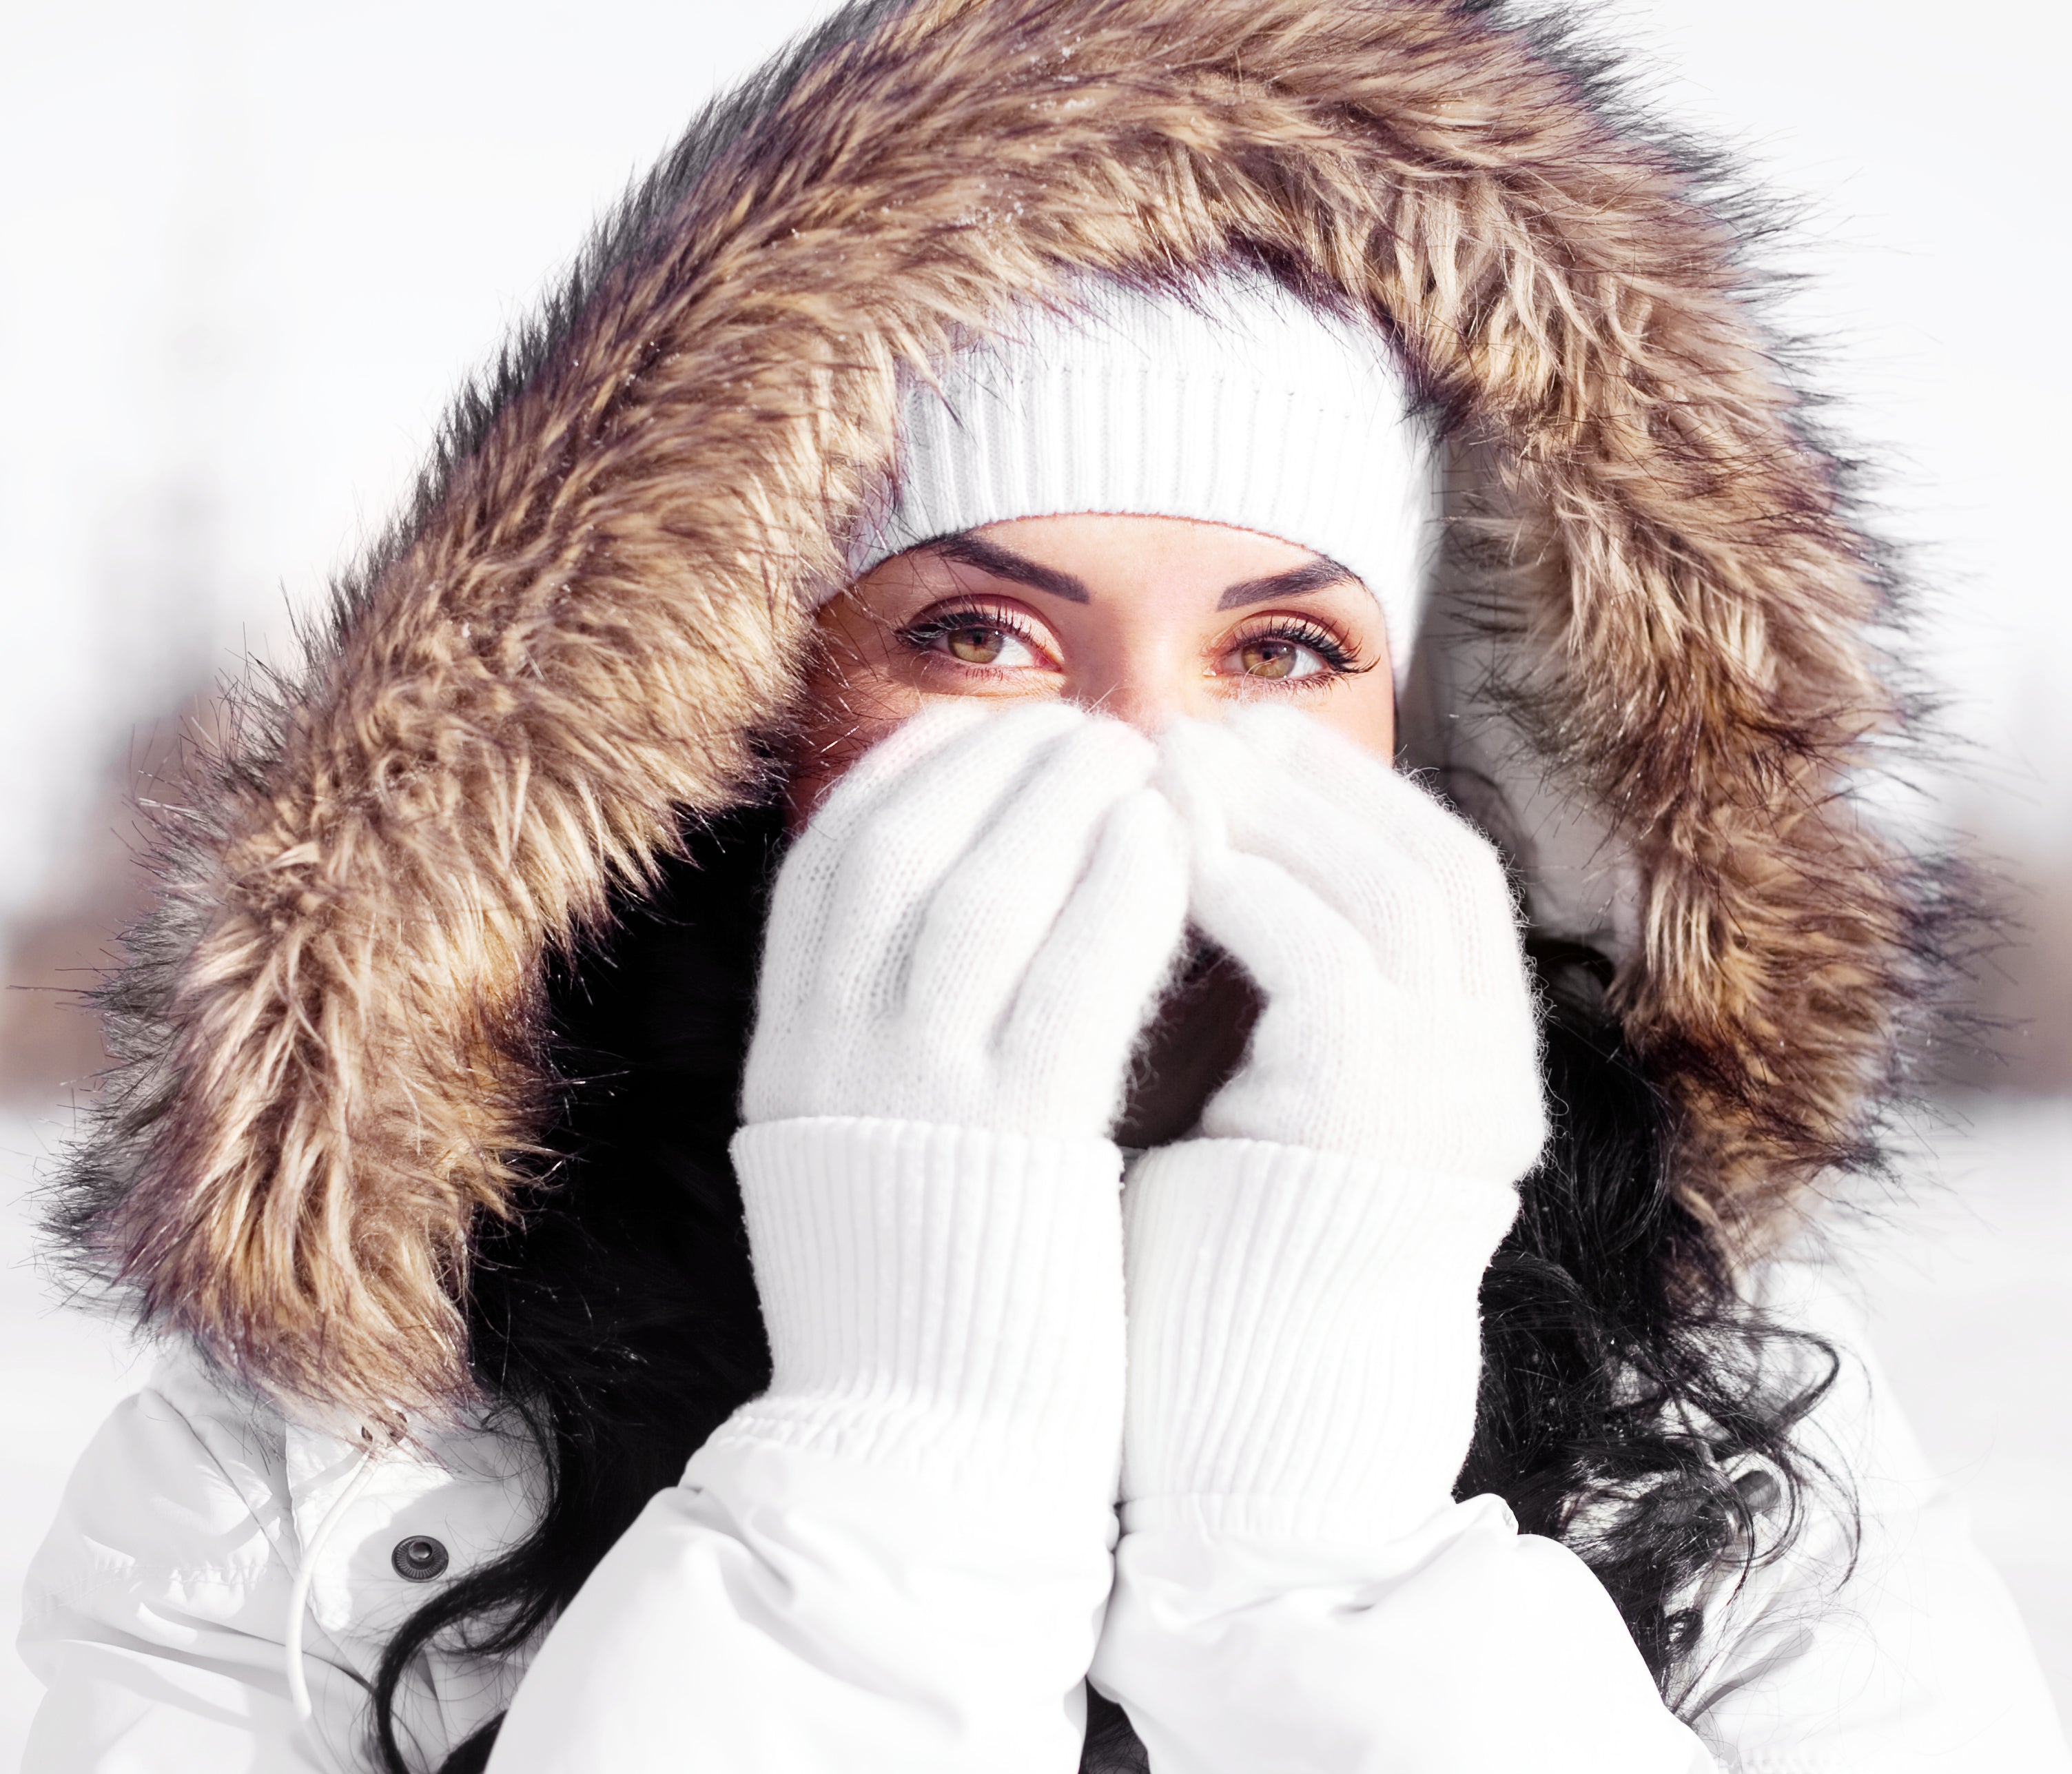 7 Proven Ways to Keep Warm in Cold Weather